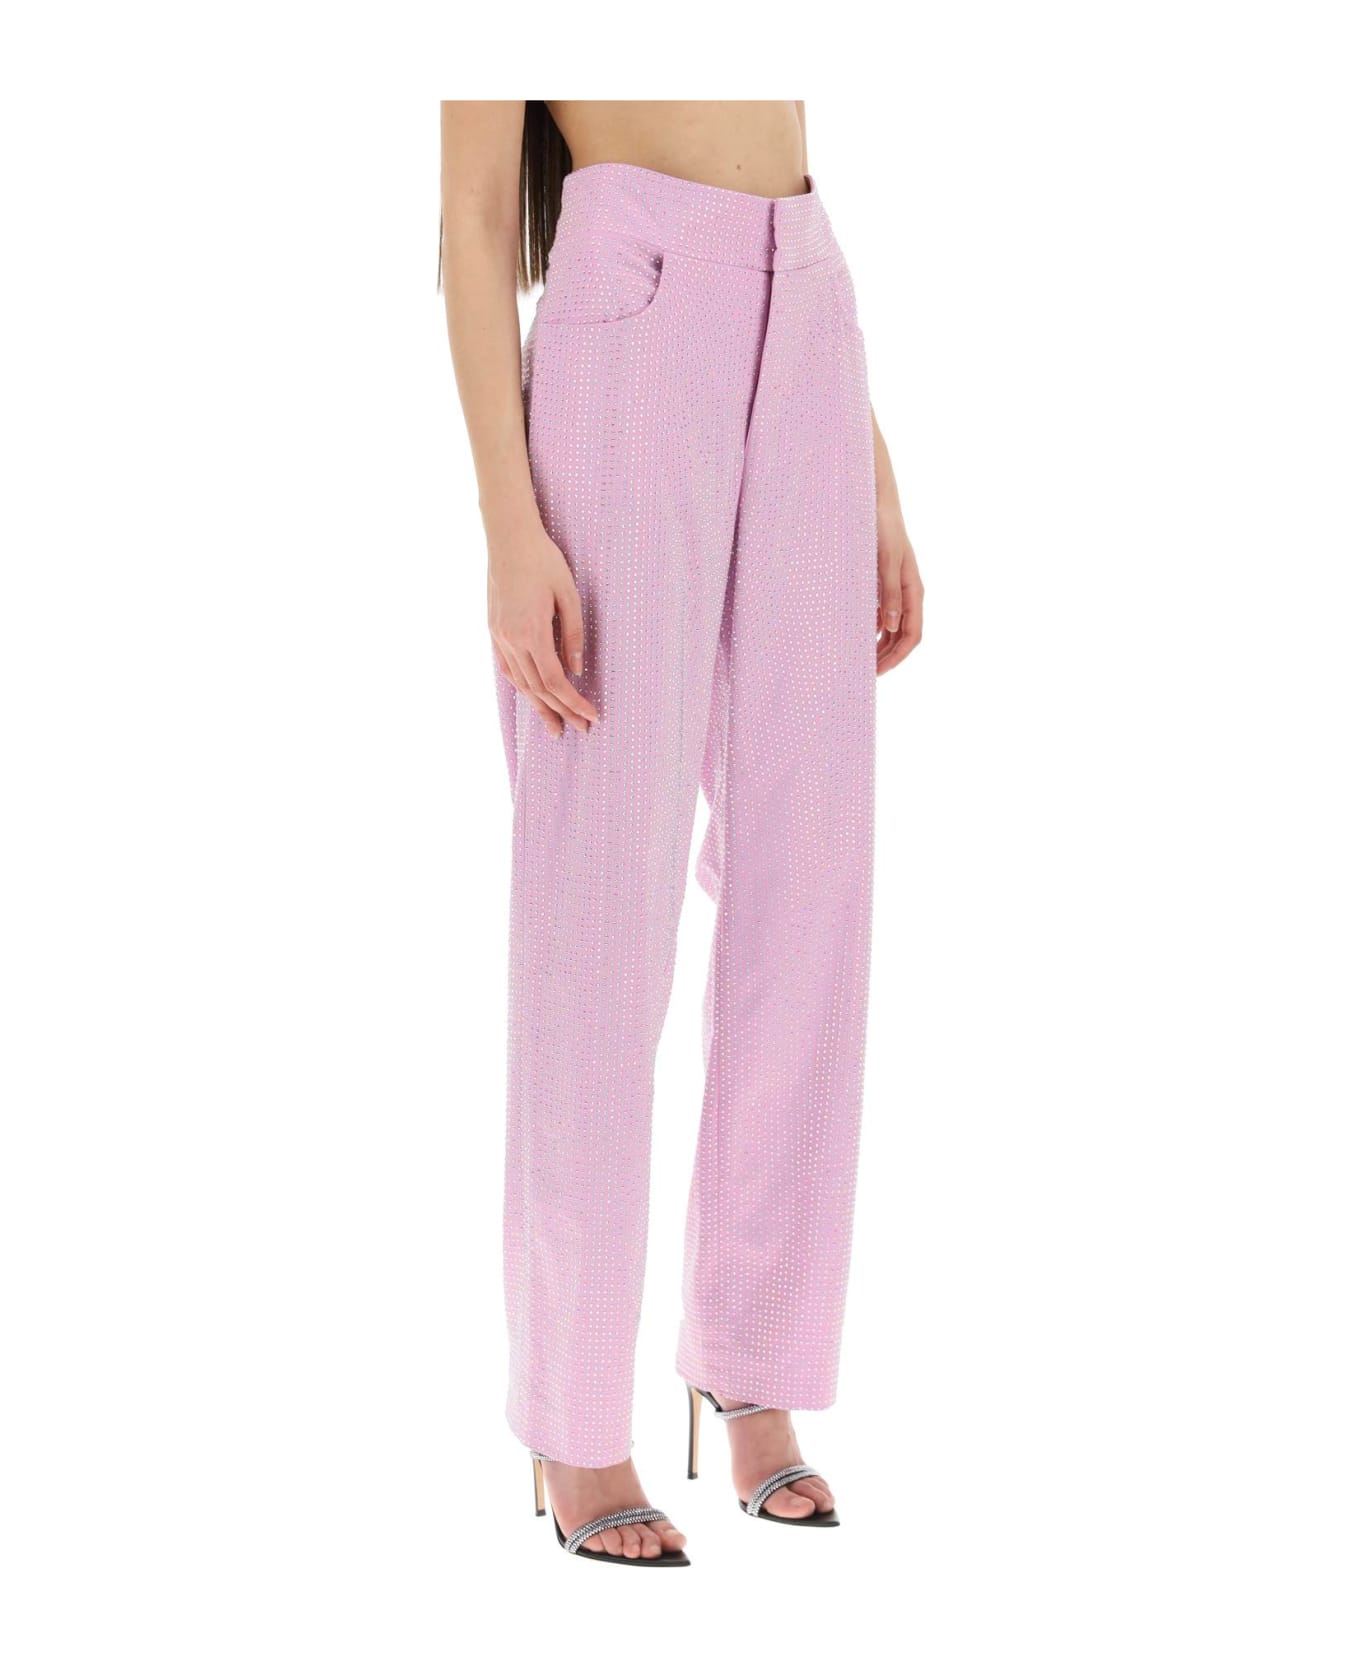 Giuseppe di Morabito Wide-leg Pants With Crystals - LILAC PINK (Pink)